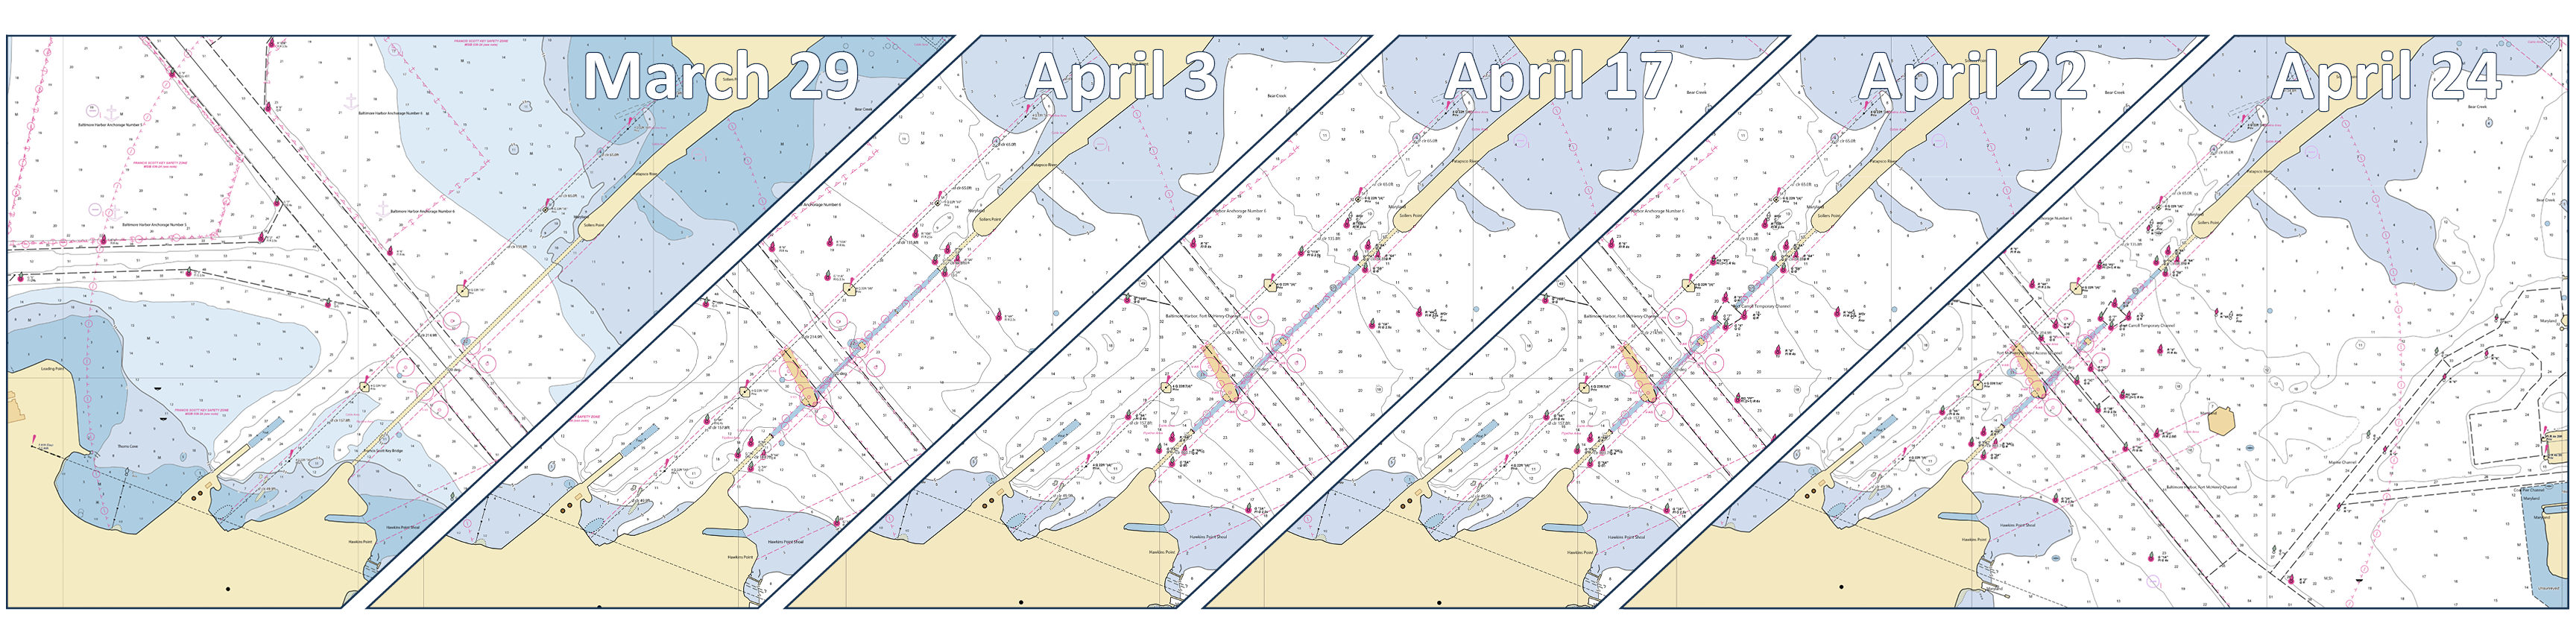 A NOAA graphic showing the nautical chart update progression of the area from March 29 to April 24, derived from the NOAA Custom Chart application.